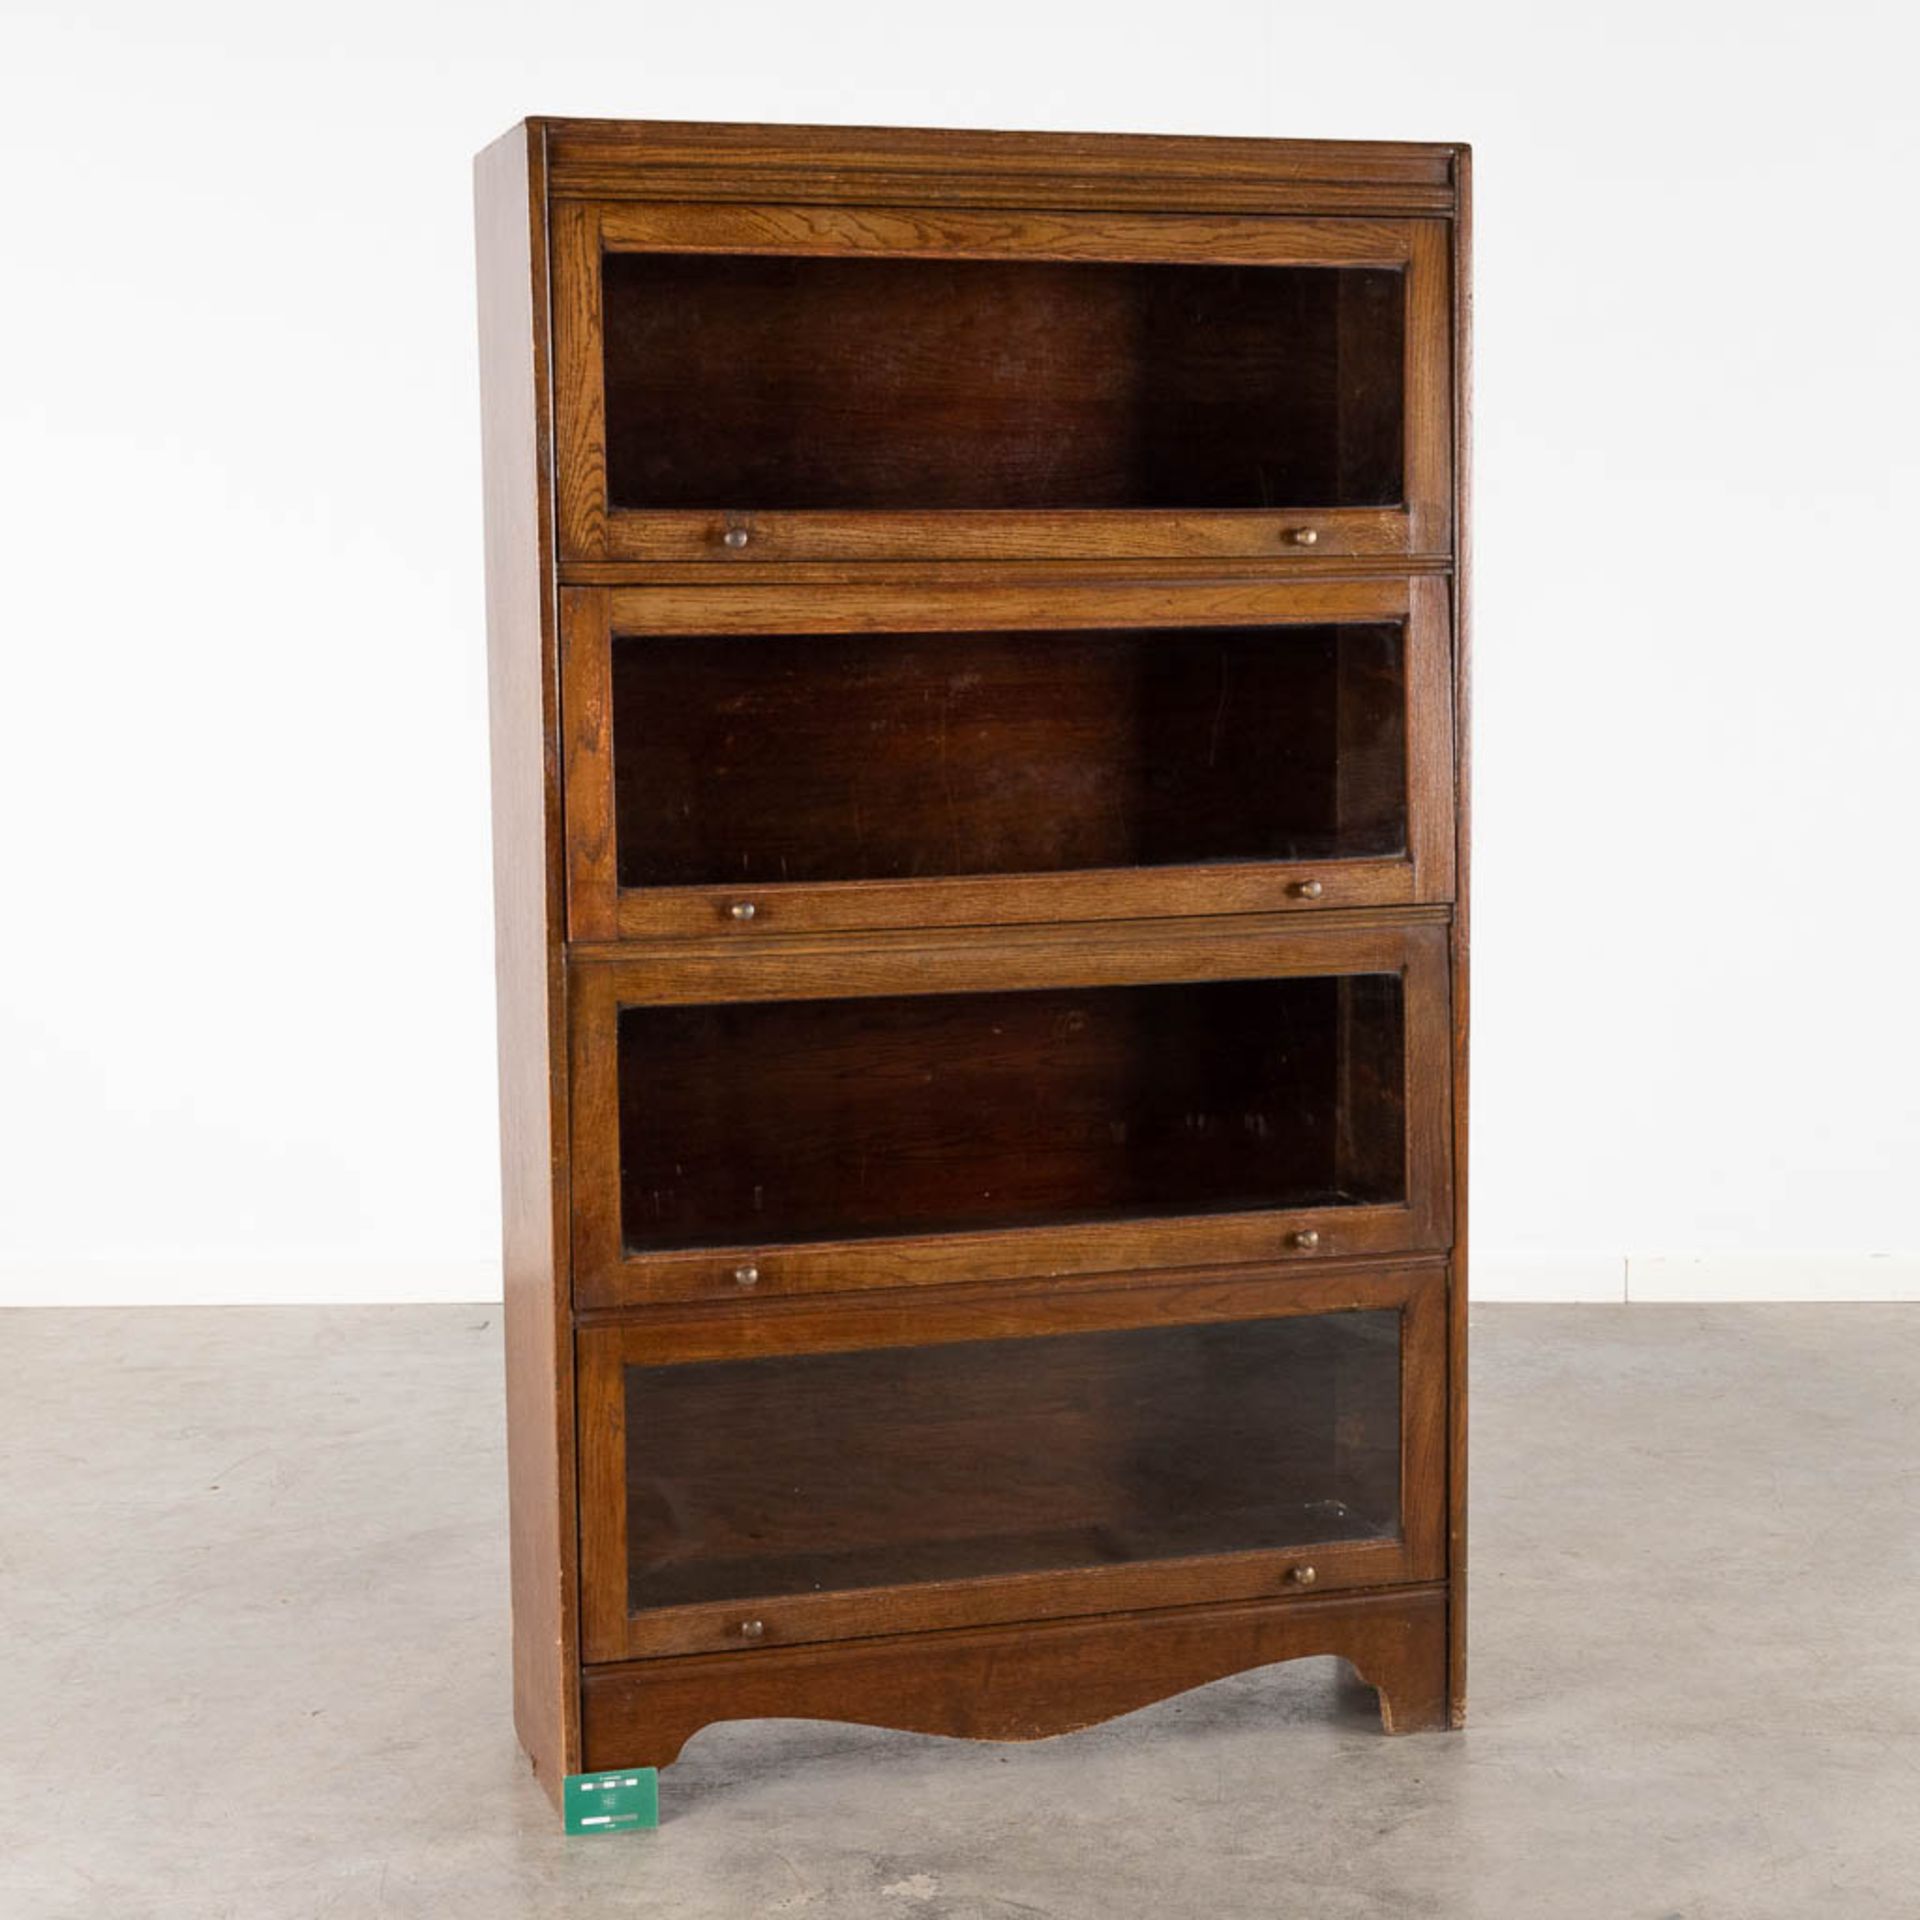 An antique English 'Barrister' bookcase, drop down glass doors. (D:30 x W:89 cm) - Image 2 of 10